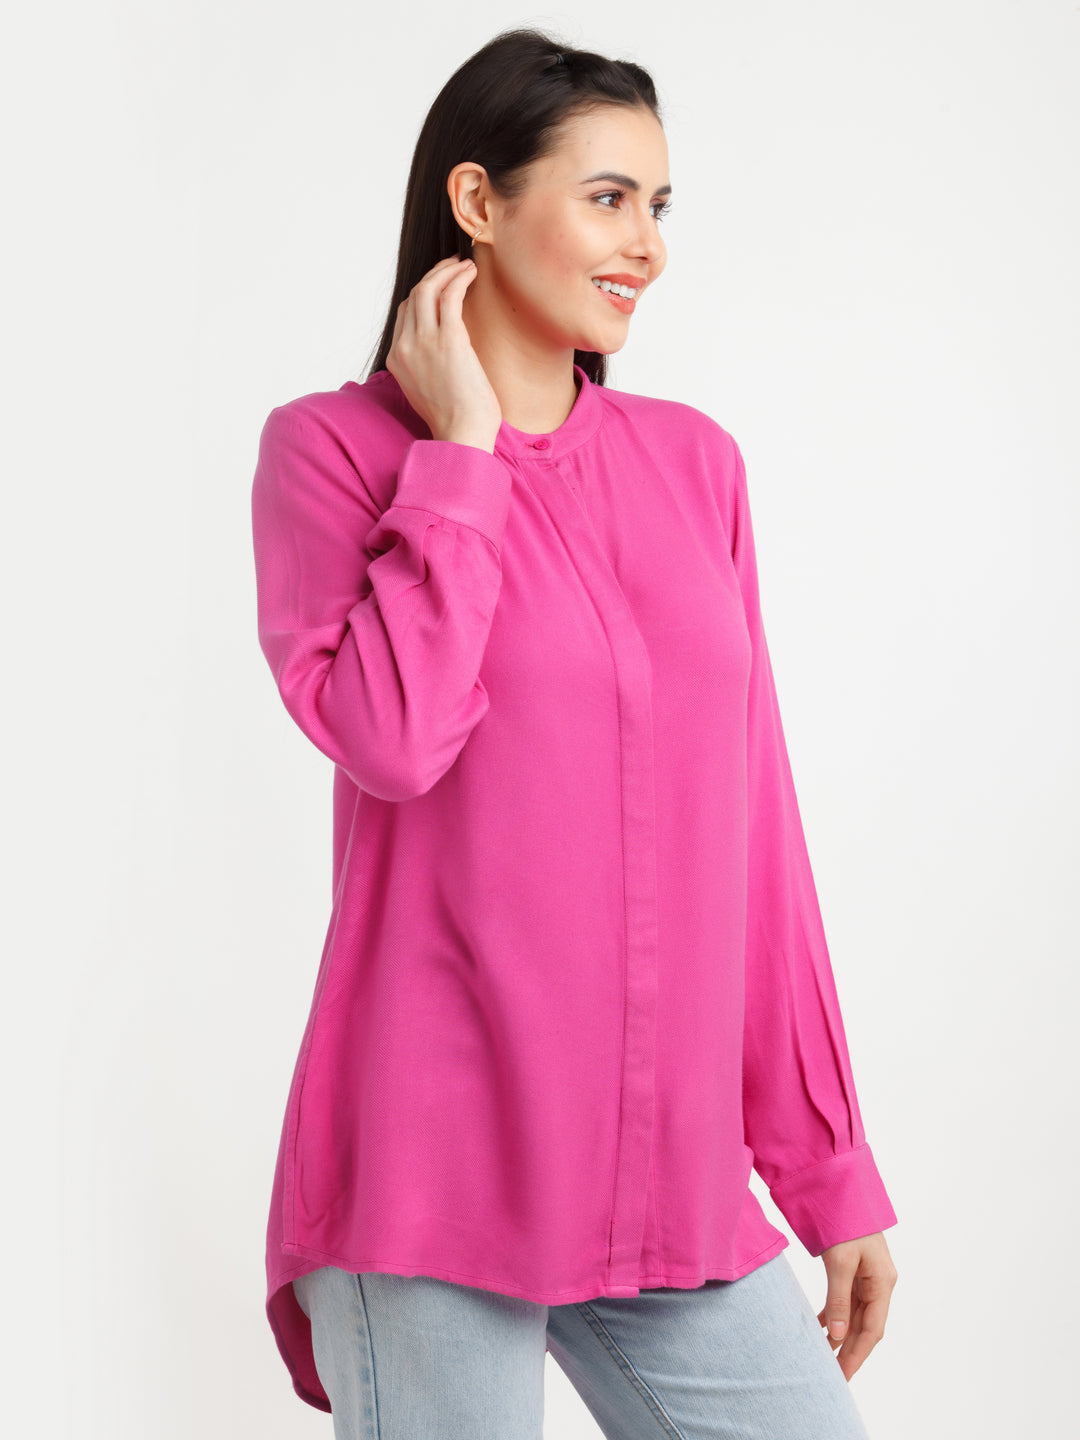 Pink Solid Shirt For Women